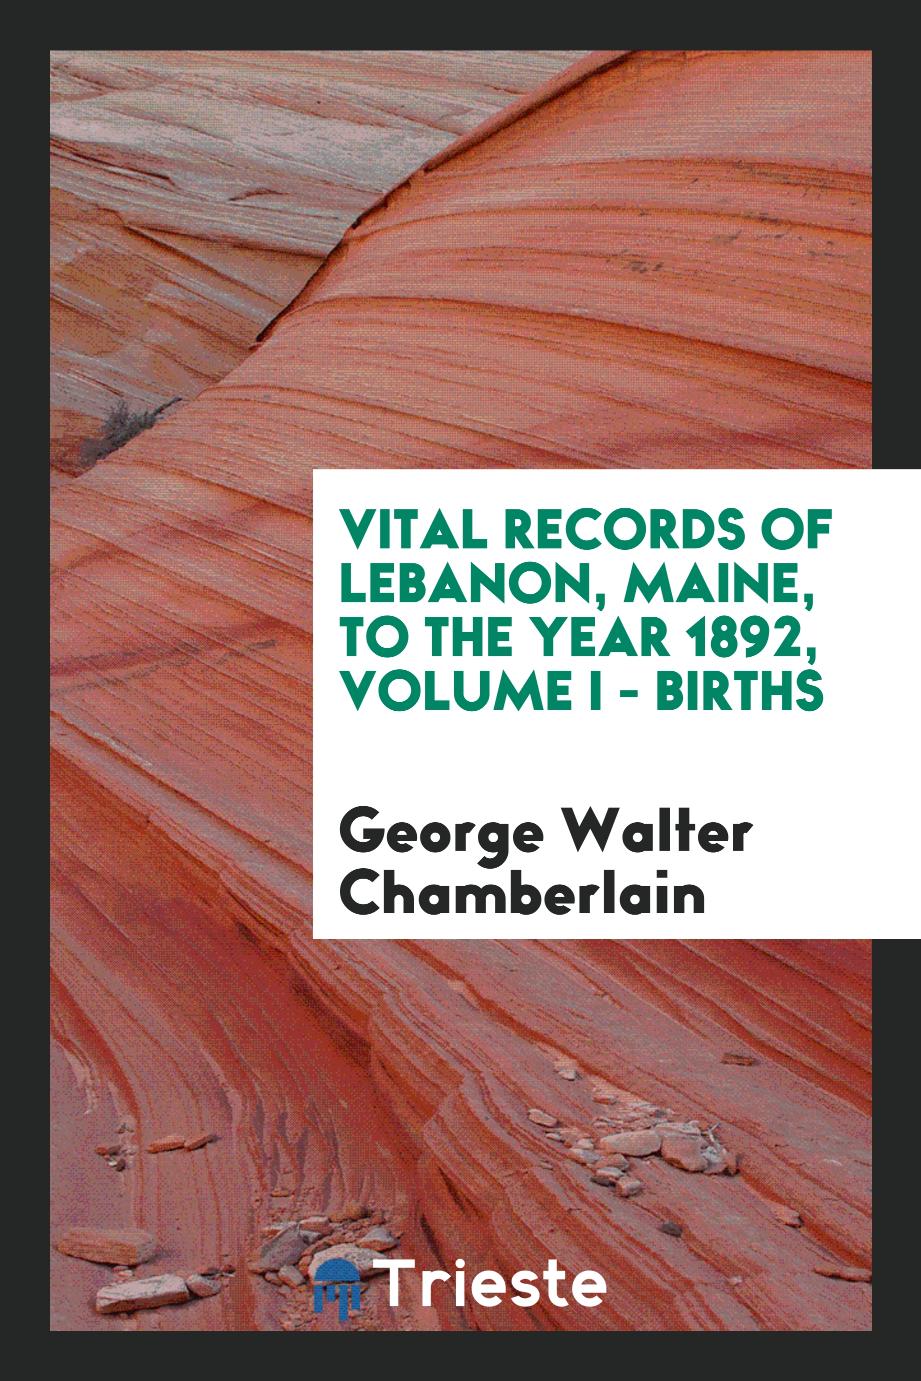 Vital records of Lebanon, Maine, to the year 1892, Volume I - Births